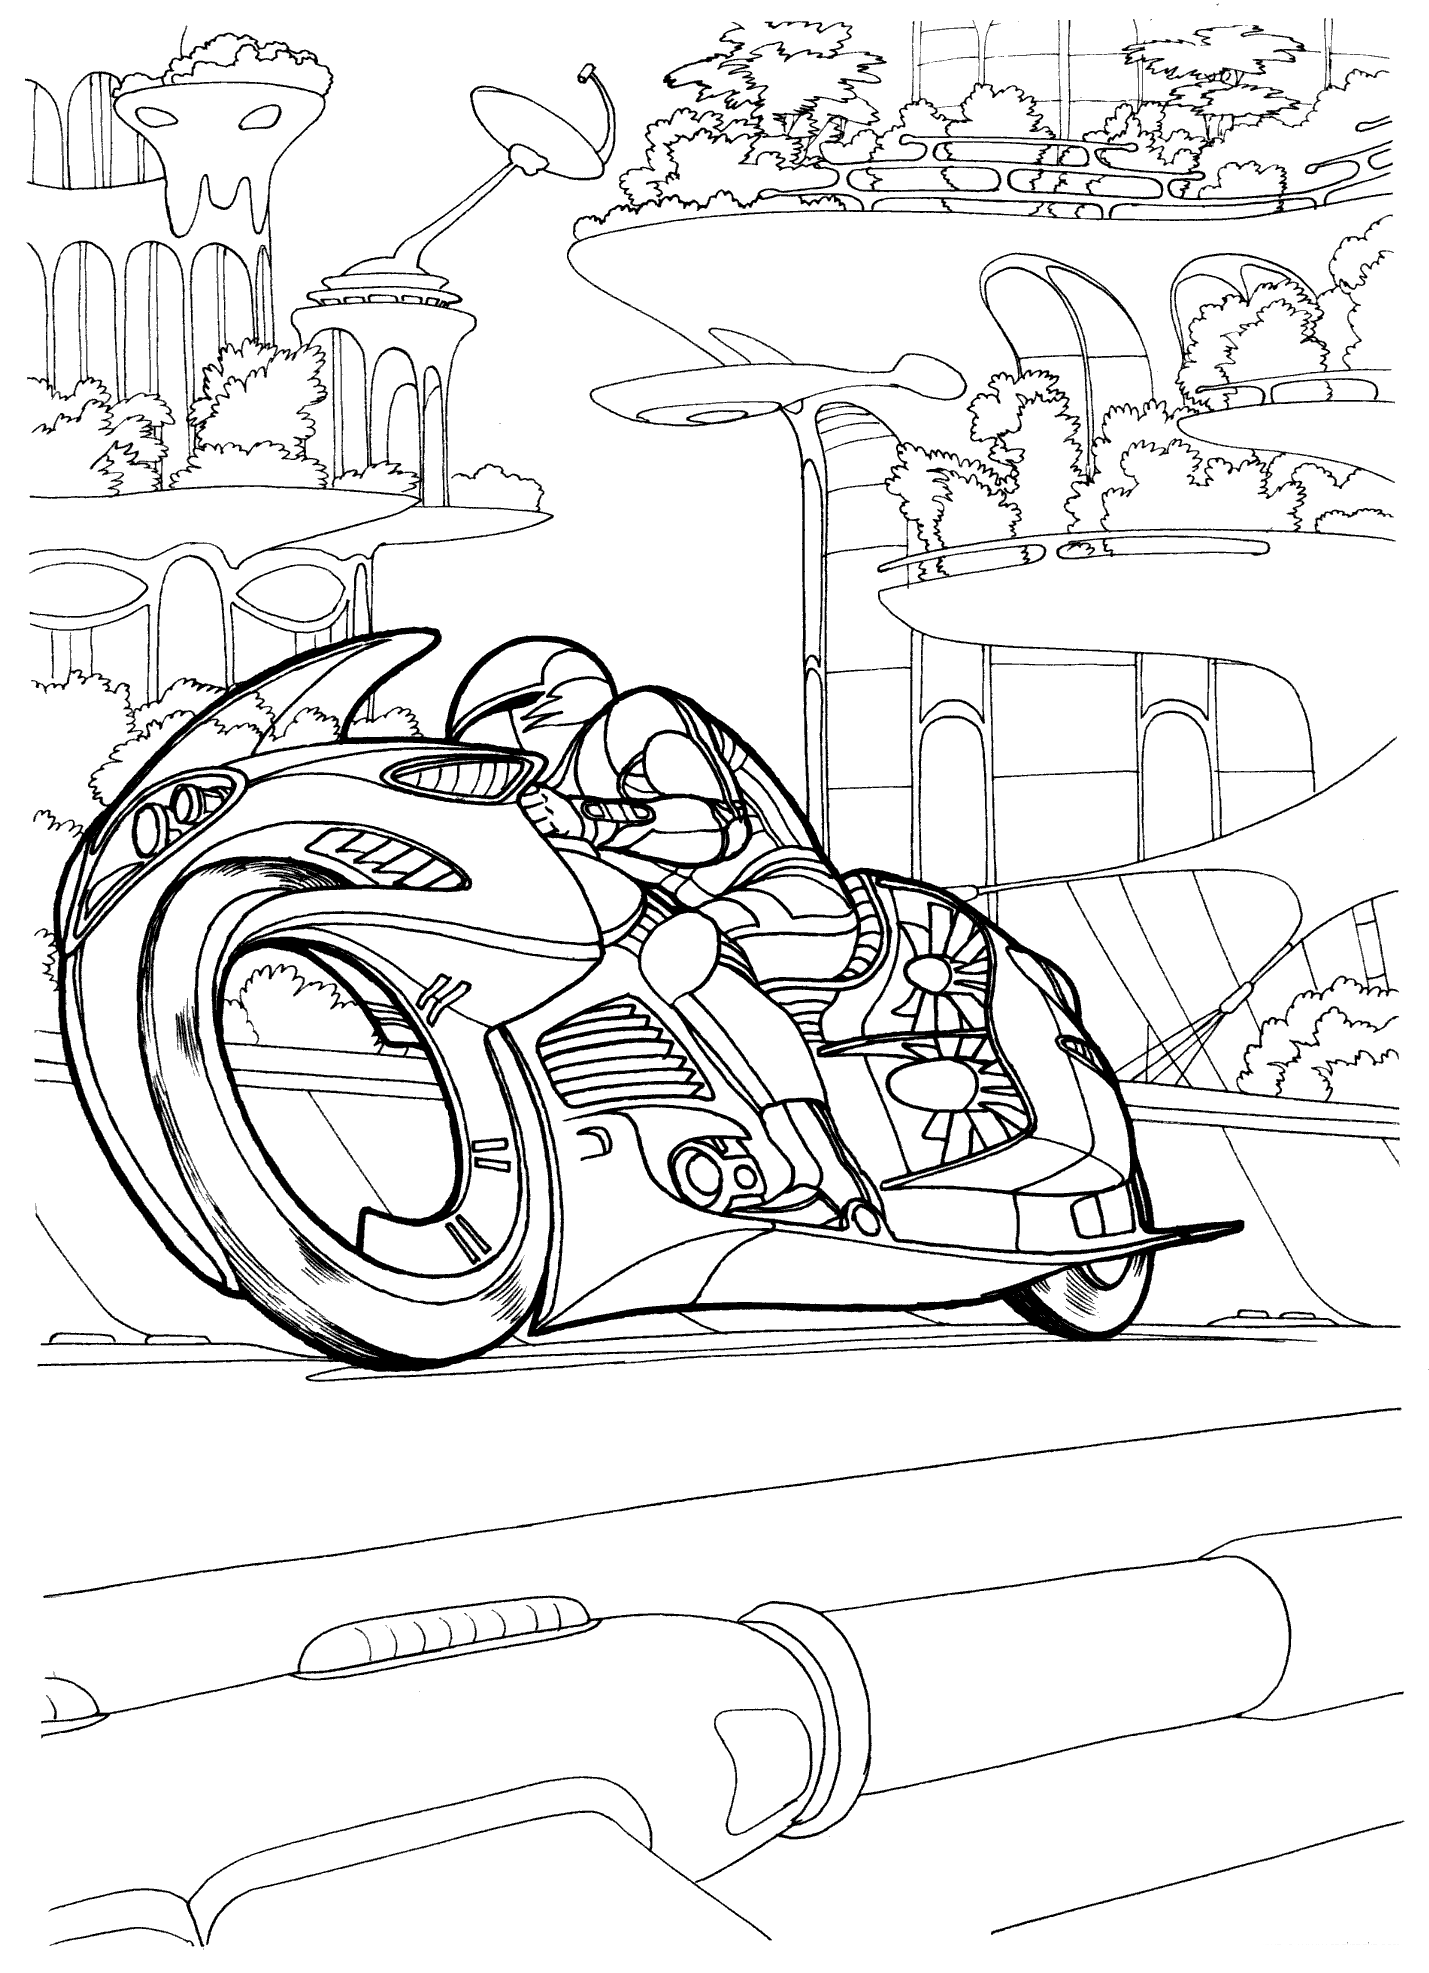 Download Coloring page - A prototype motorcycle